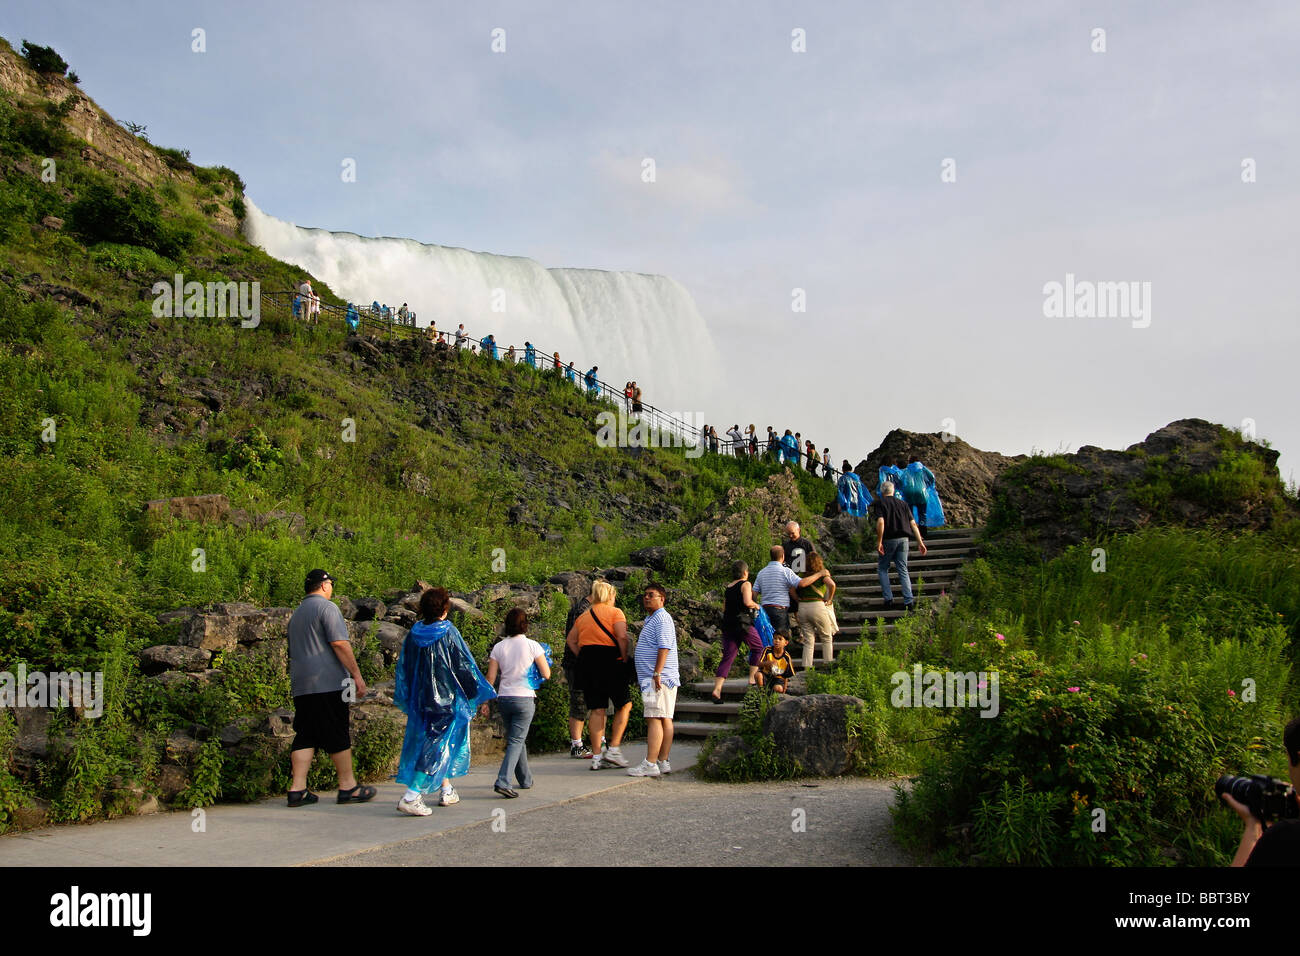 Edge of Niagara falls waterfall with people in New York NY State Park USA low angle from below Impressive hi-res Stock Photo